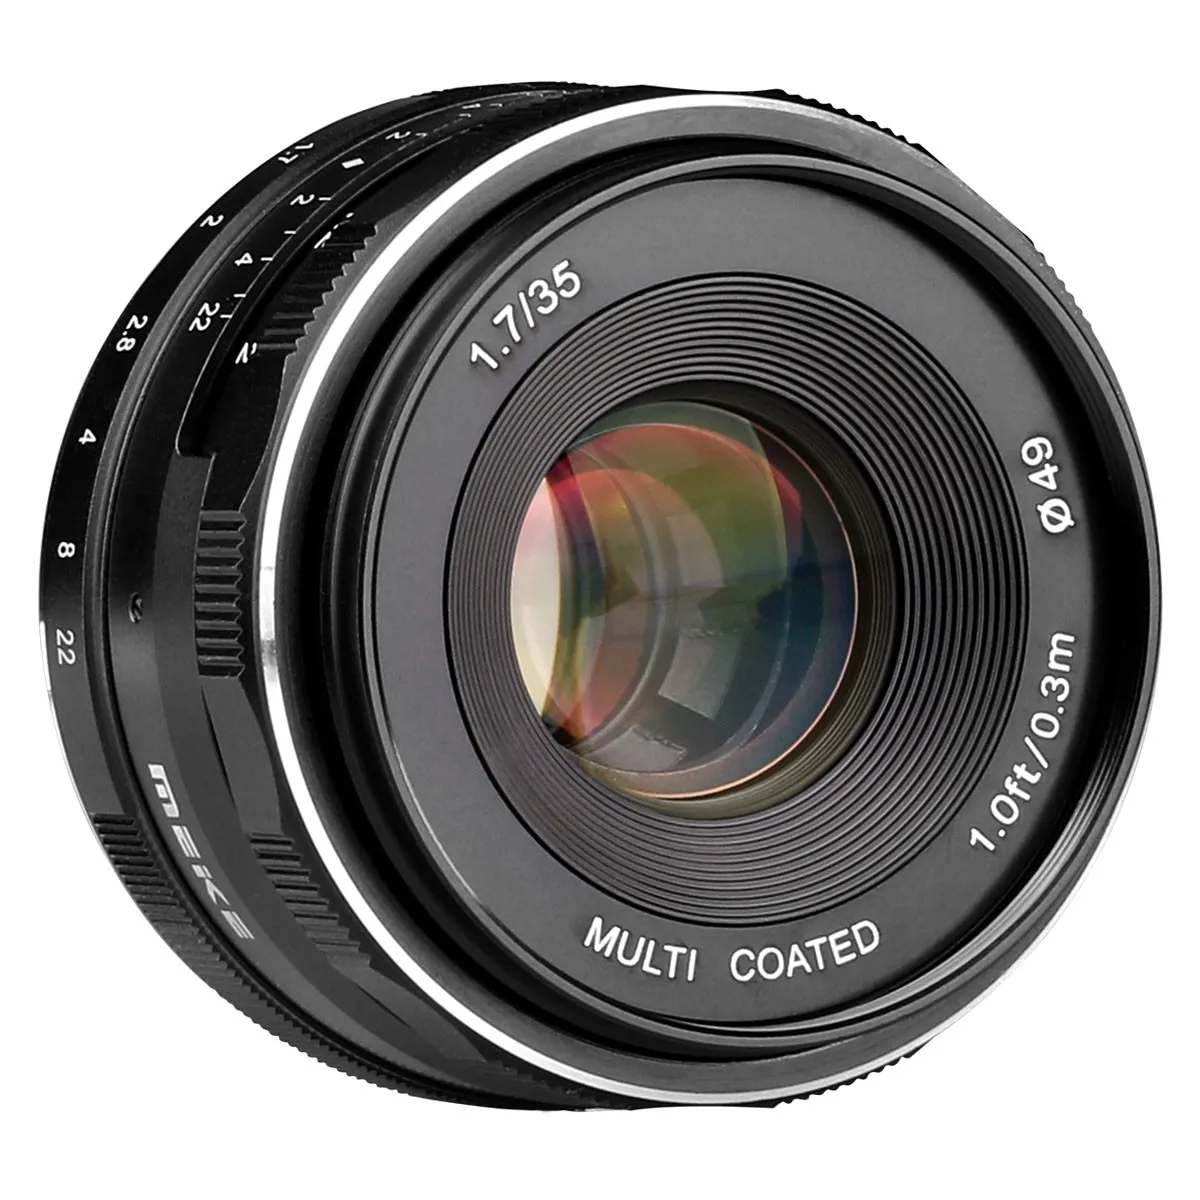 

Meike 35mm f1.7 M4/3 APS-C Wide Angle MF Lens for Oly/Pan/Lumix EM10 III/EM10 II/EM10/EM5/EM1/EP5/EPL3/EPL5/EPL6/EPL7